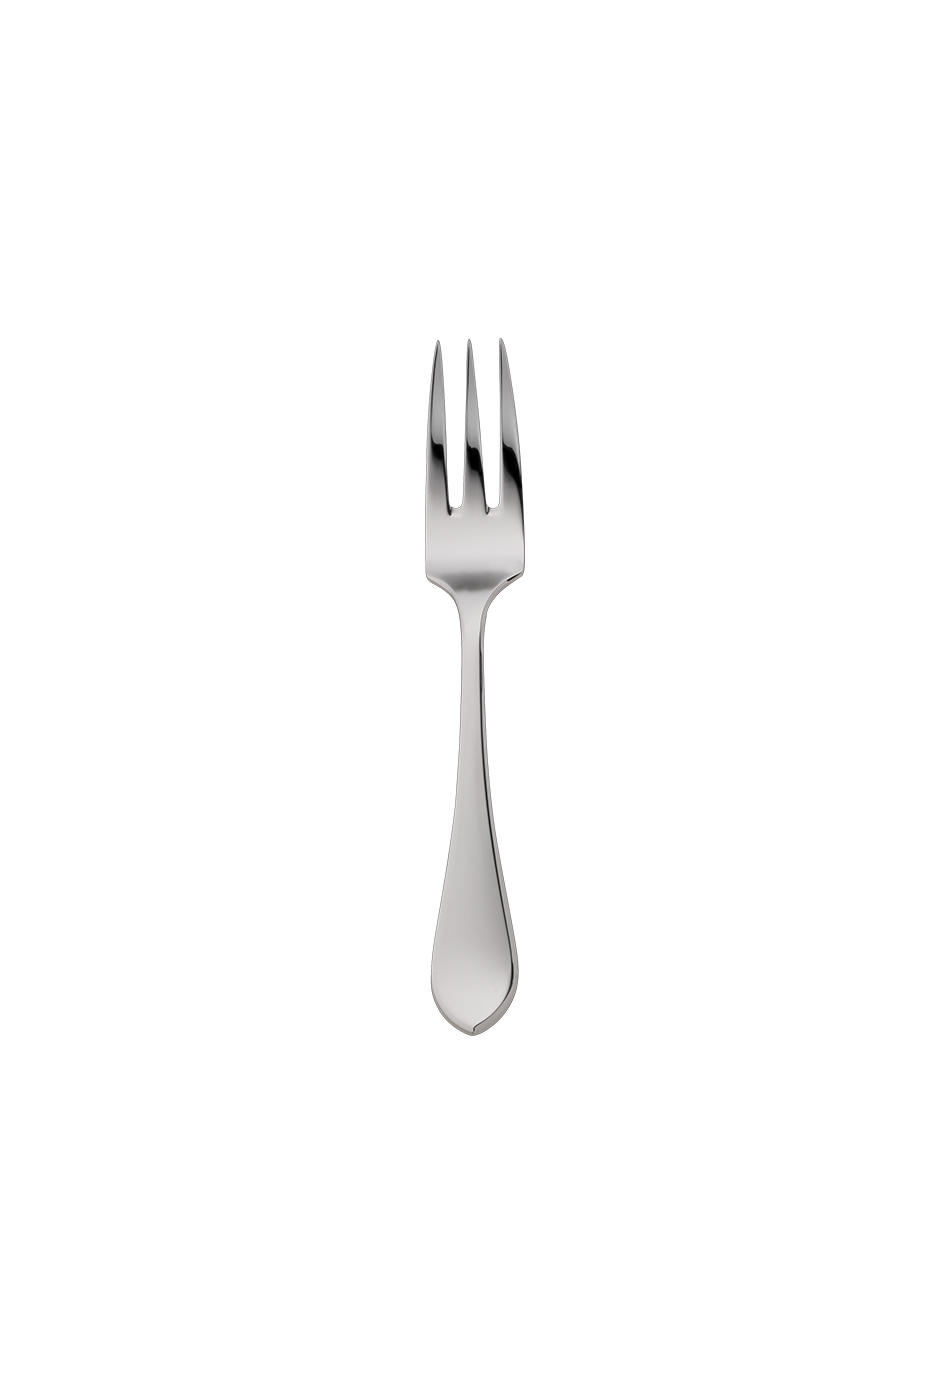 Eclipse Cake Fork (150g massive silverplated)